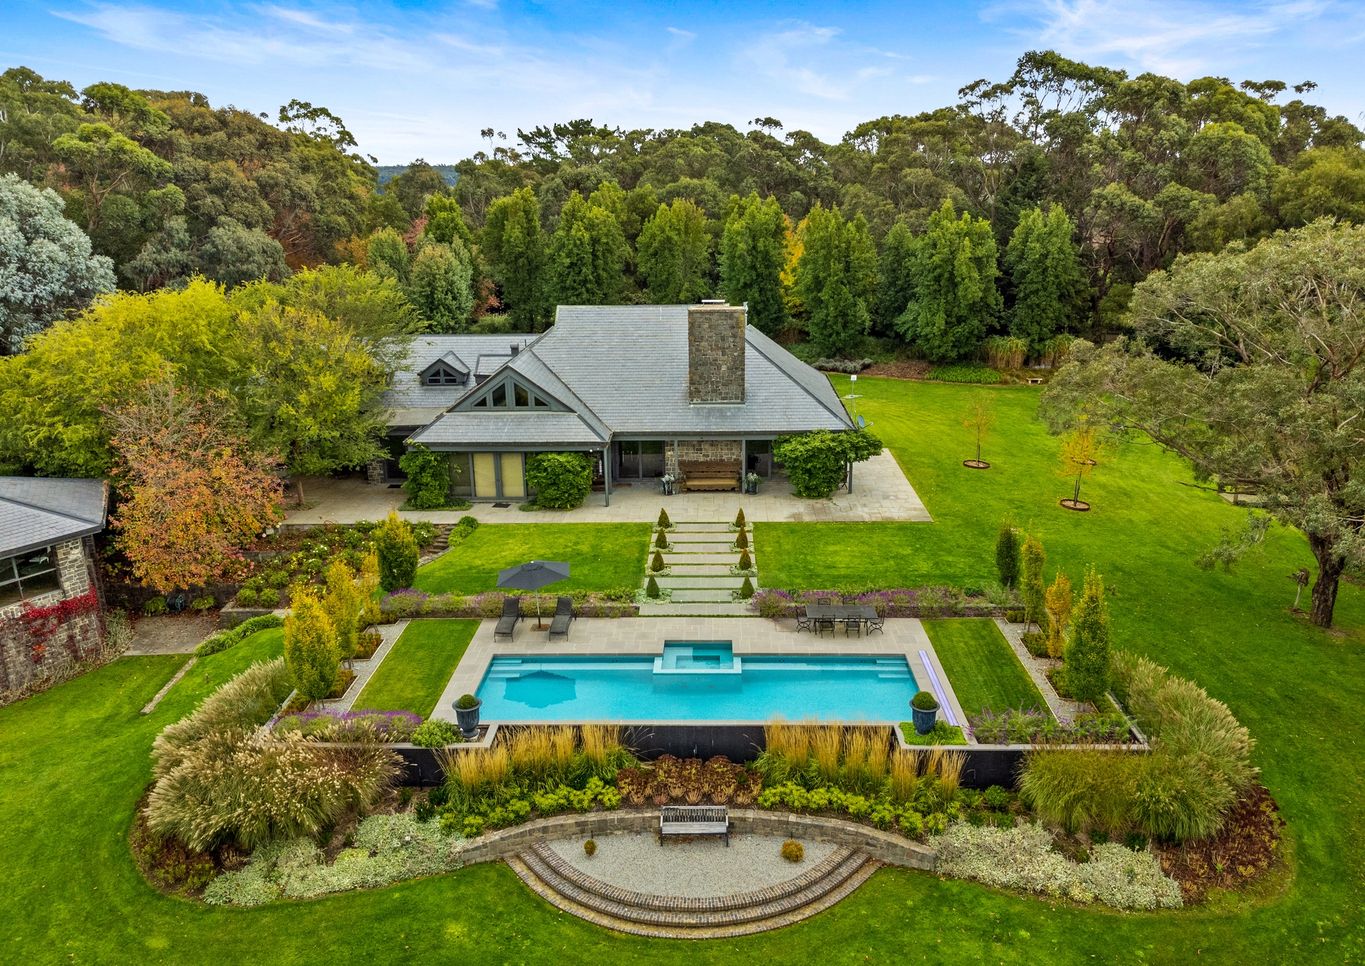 Macedon Ranges property with pool and autumn trees landscape design